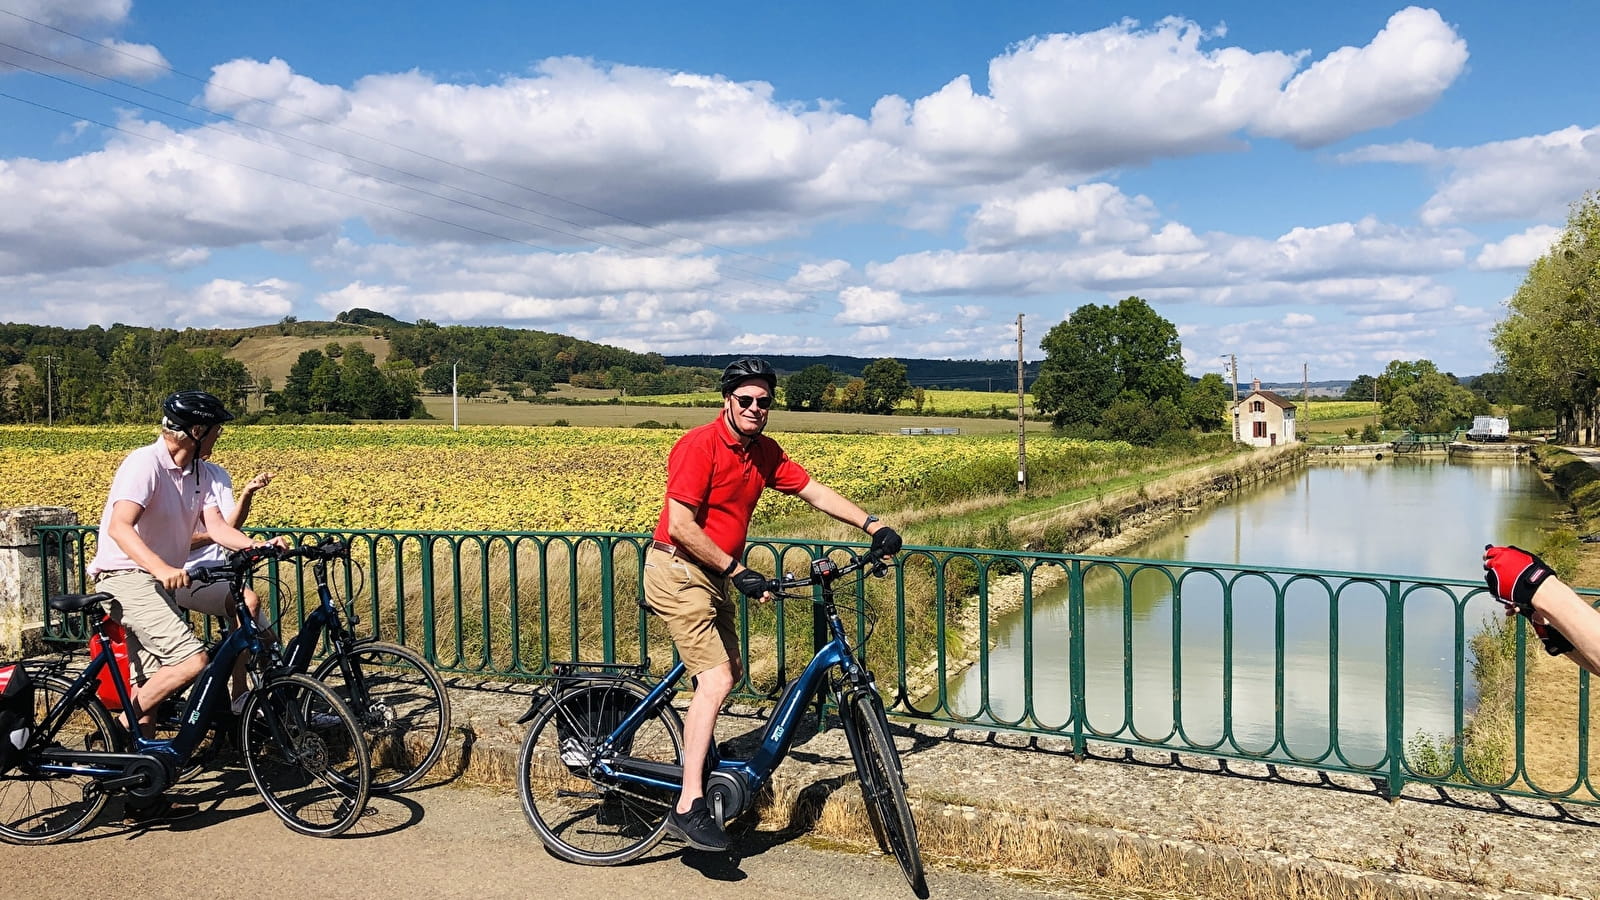 Cycle ride - Lavoirs and vineyards of the Auxerrois region